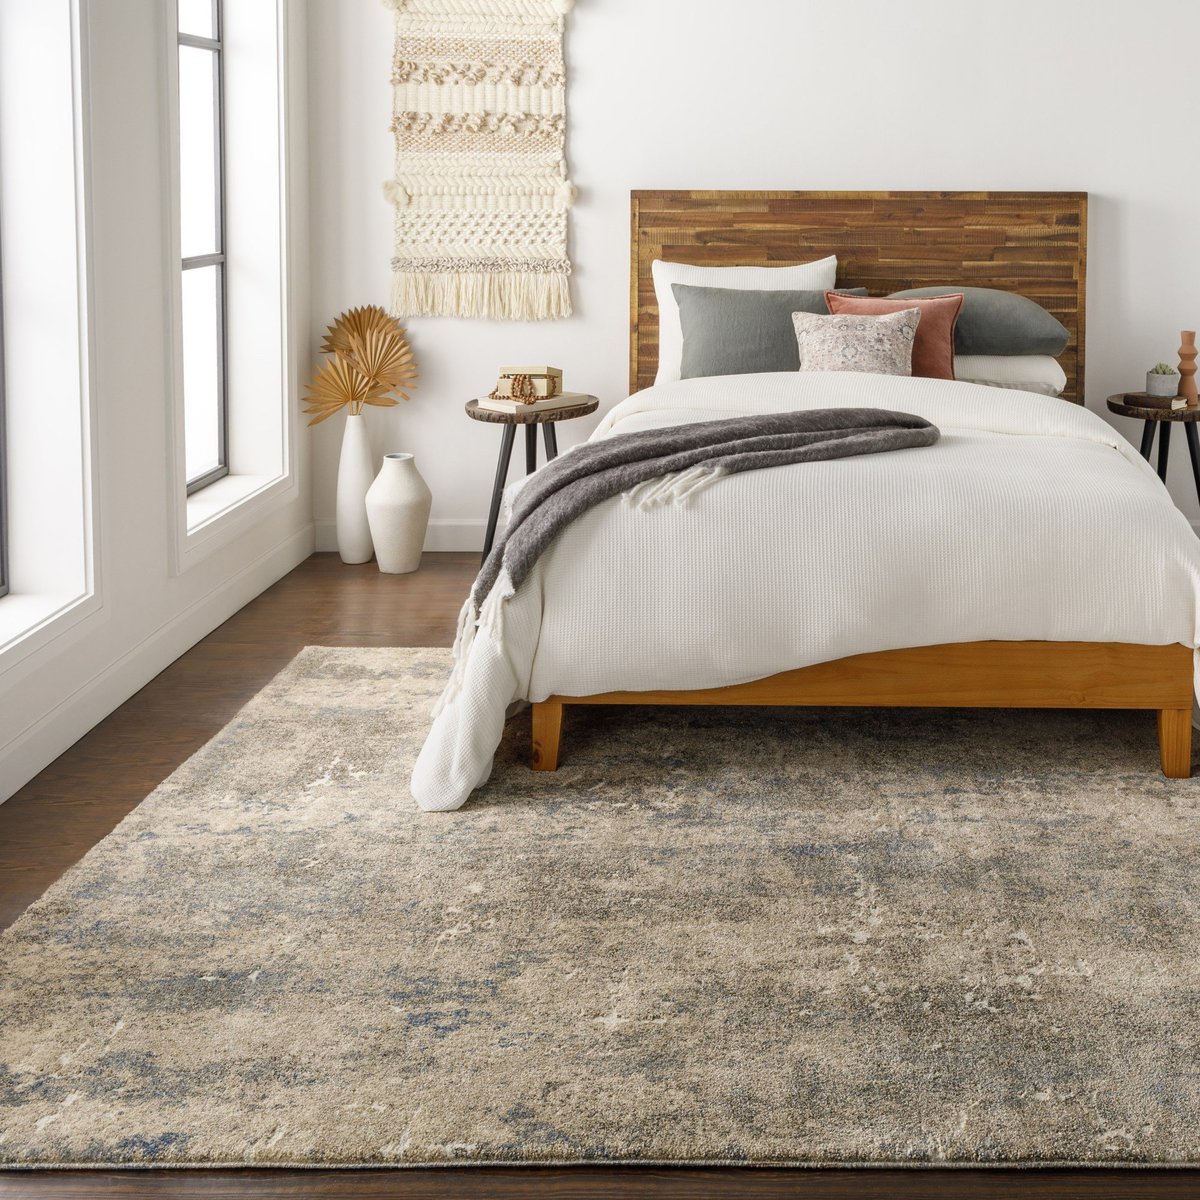 How to Choose the Right Rug for Under a Bed - Amanda Katherine